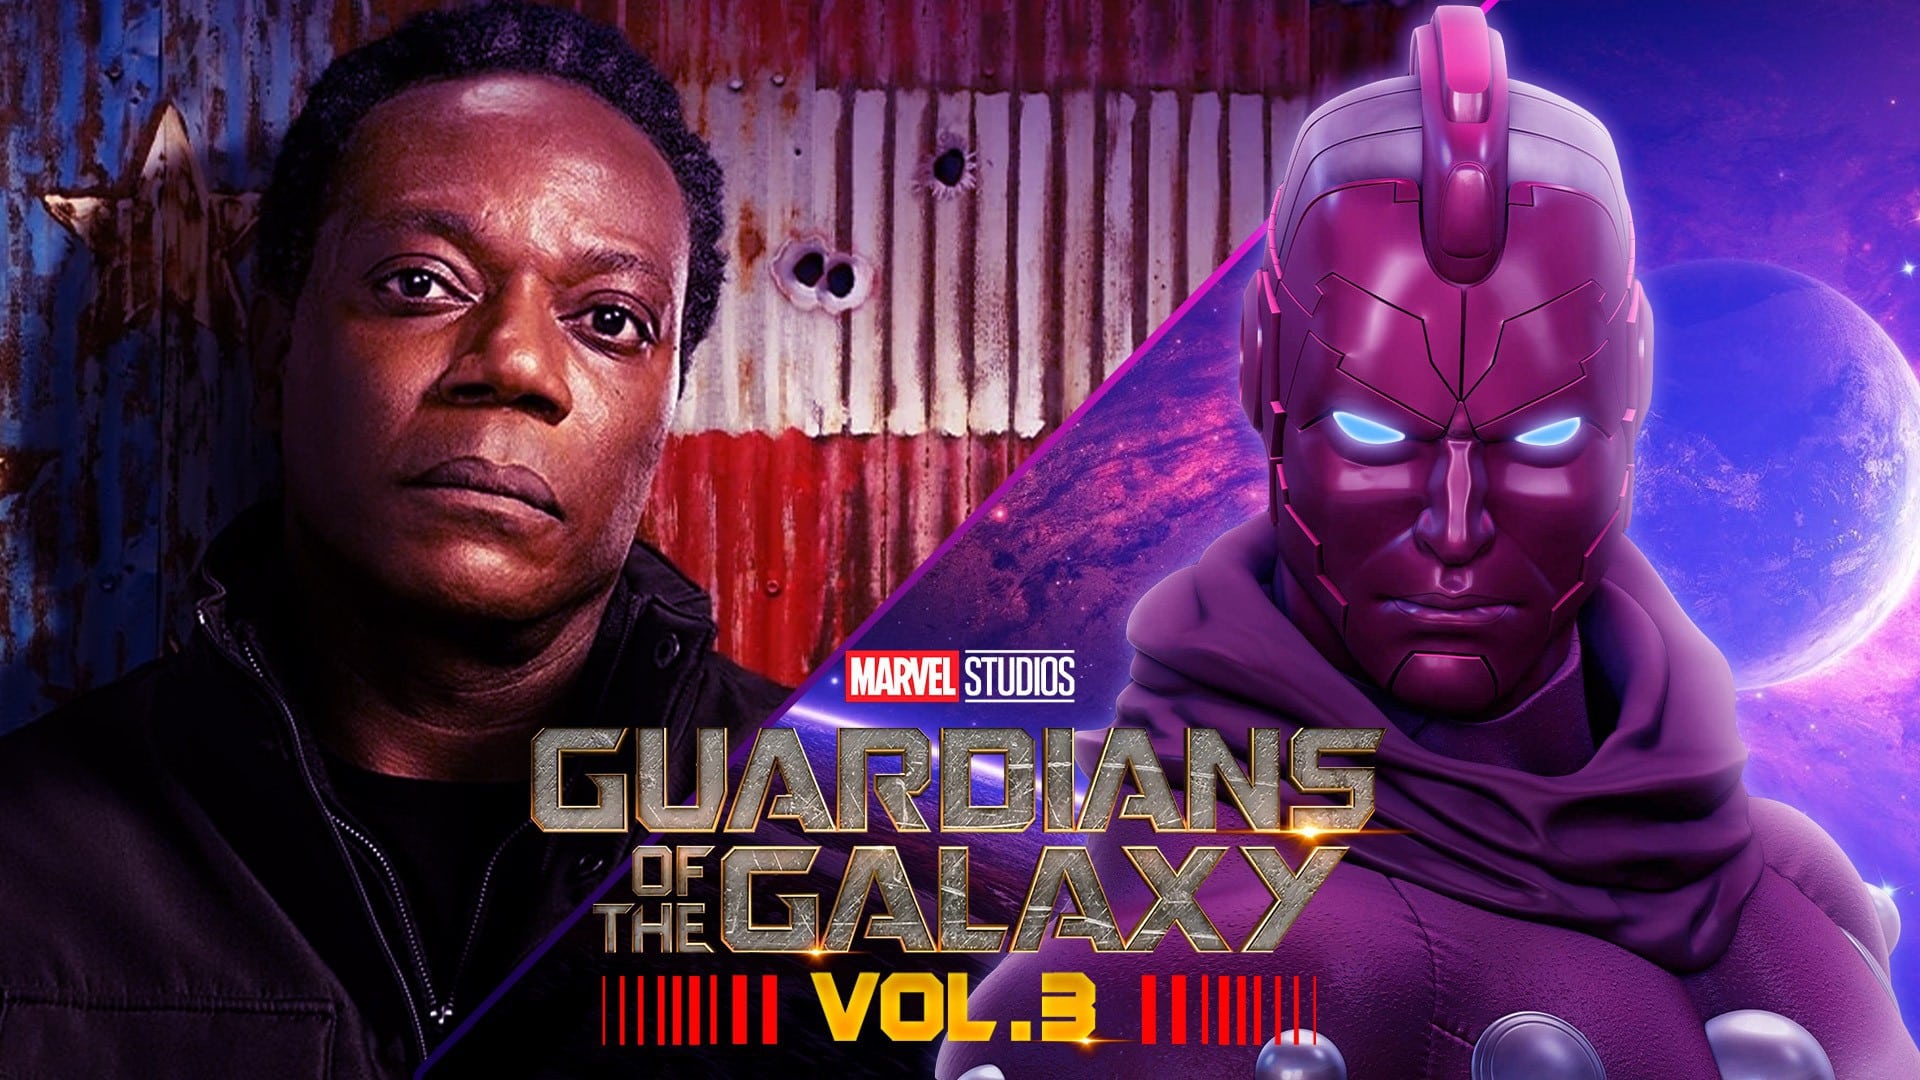 Exclusive: NEW 'GotG Vol. 3' Image Appears to confirm High Evolutionary